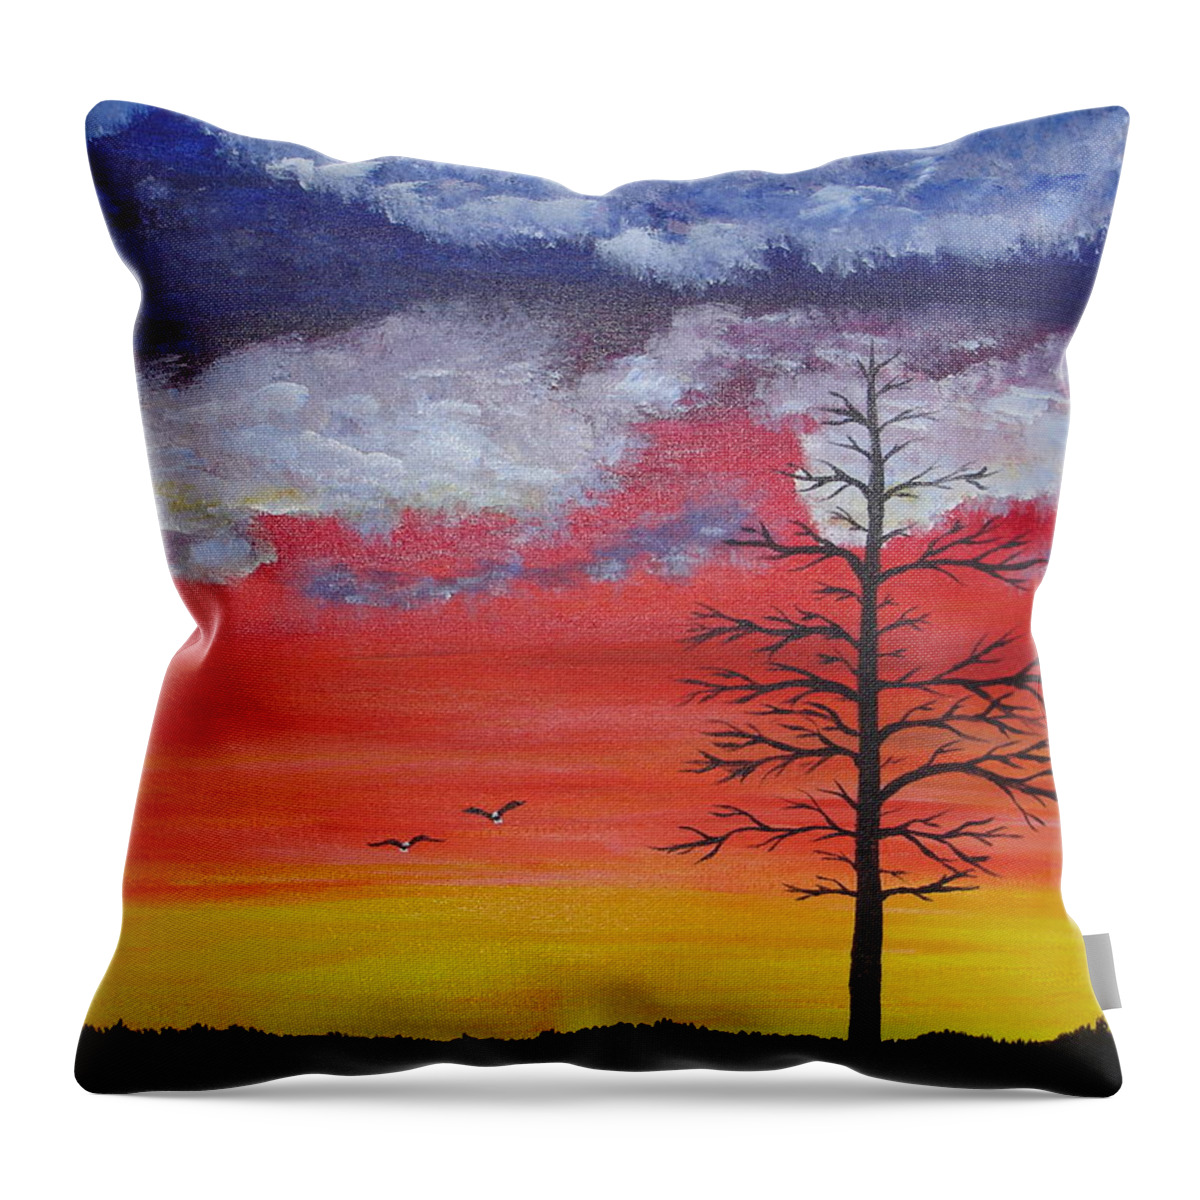 Sunrise Throw Pillow featuring the painting Morning Flight by Angie Butler